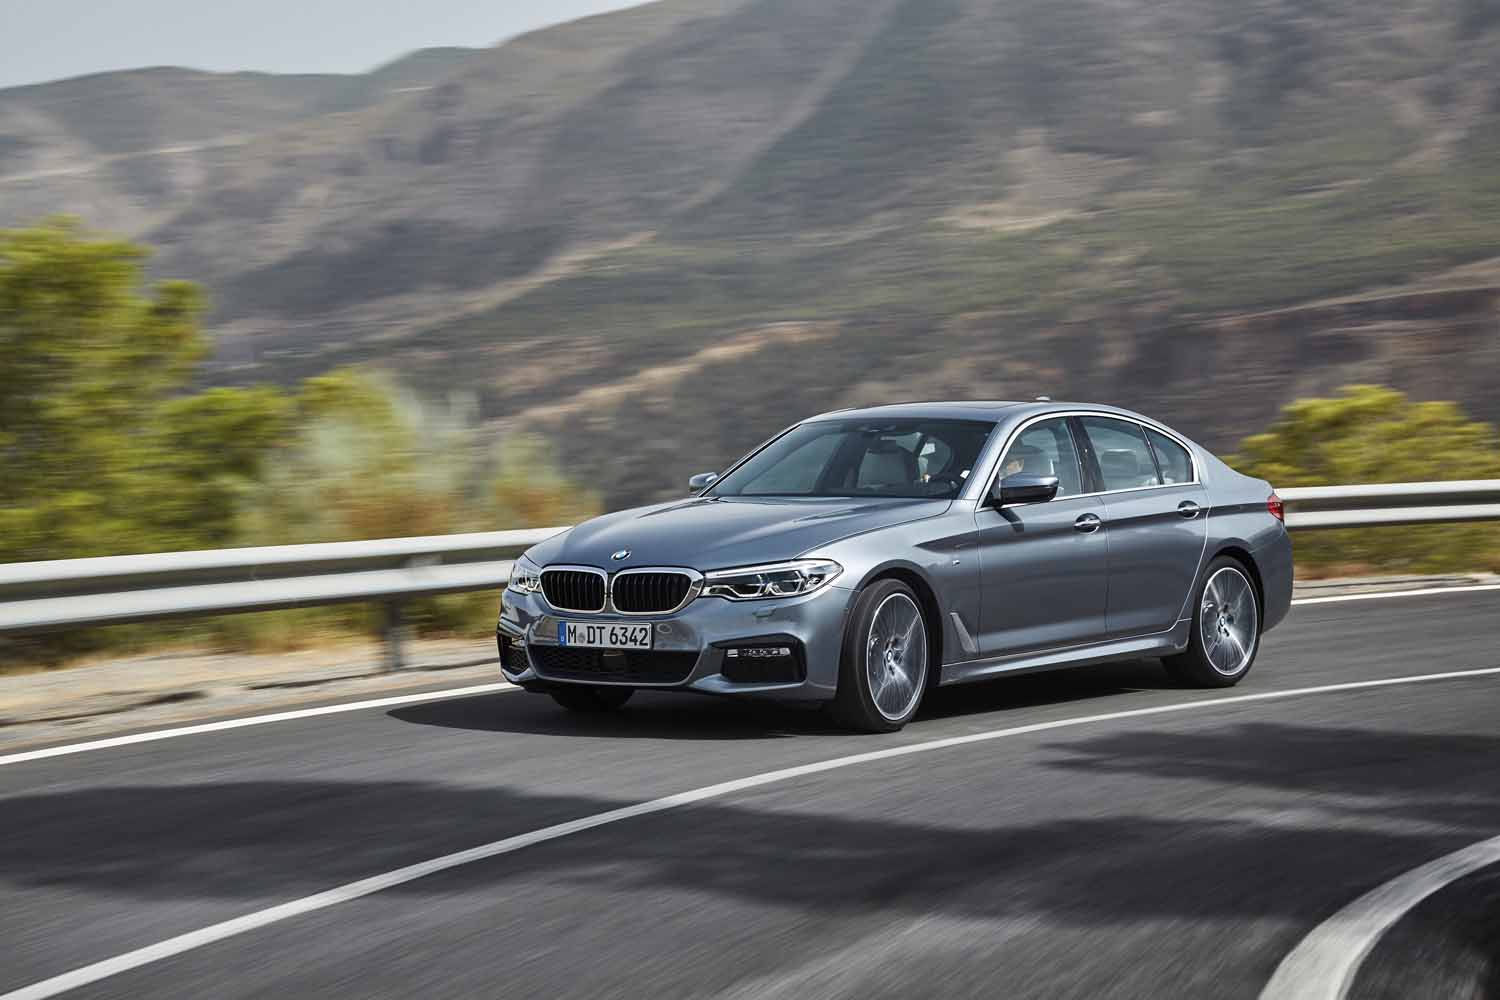 2017 bmw 5 series news pictures performance specs 20